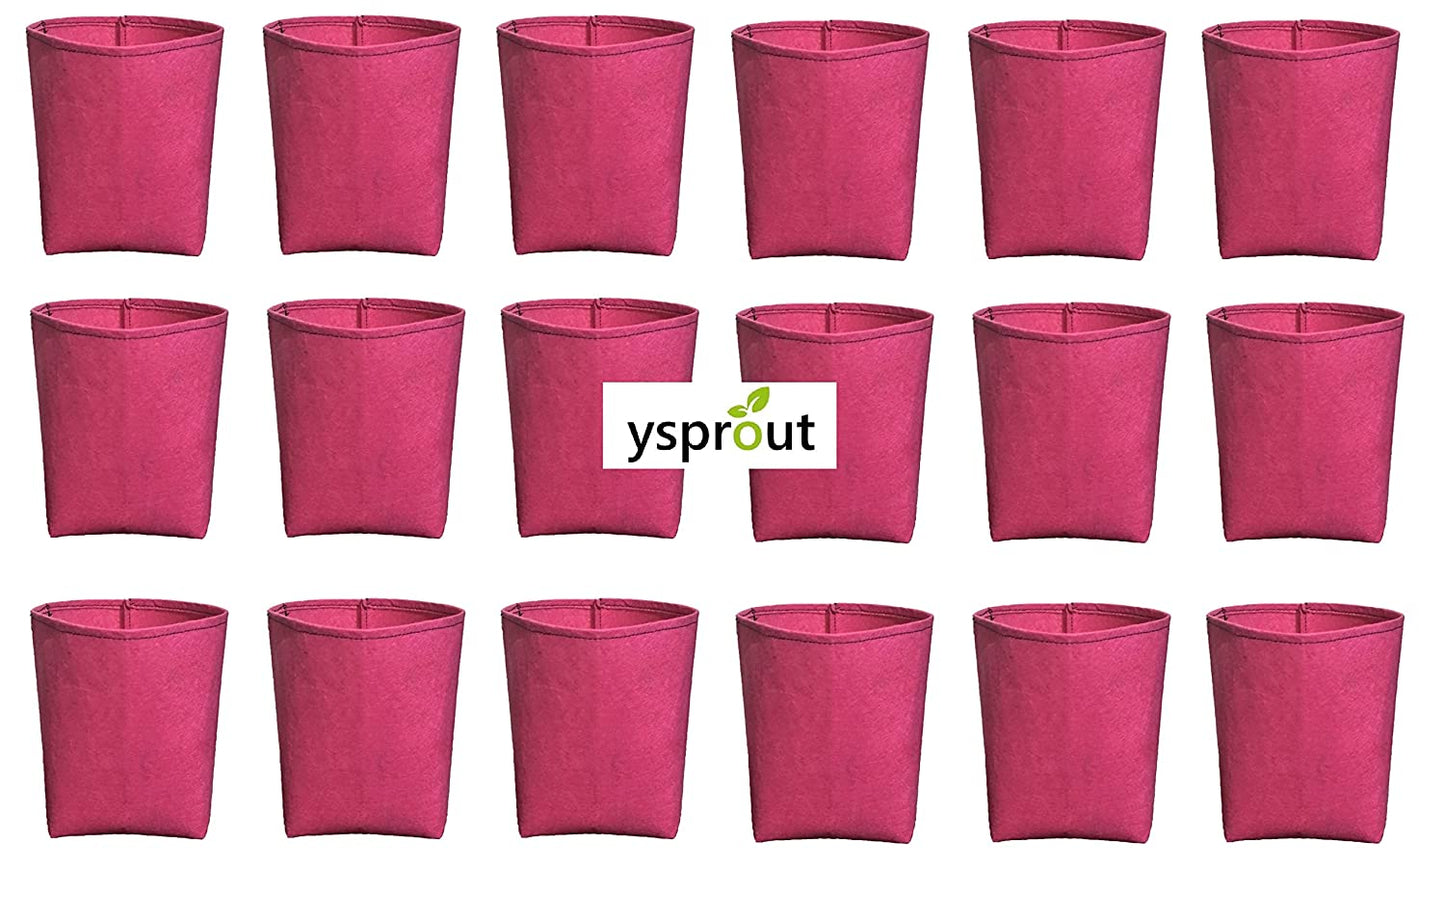 Oxypot 140 GSM Geo Fabric Nursery Grow Bags, Dia 6" X Height 6.5" (Pink Colour), Pack of 18